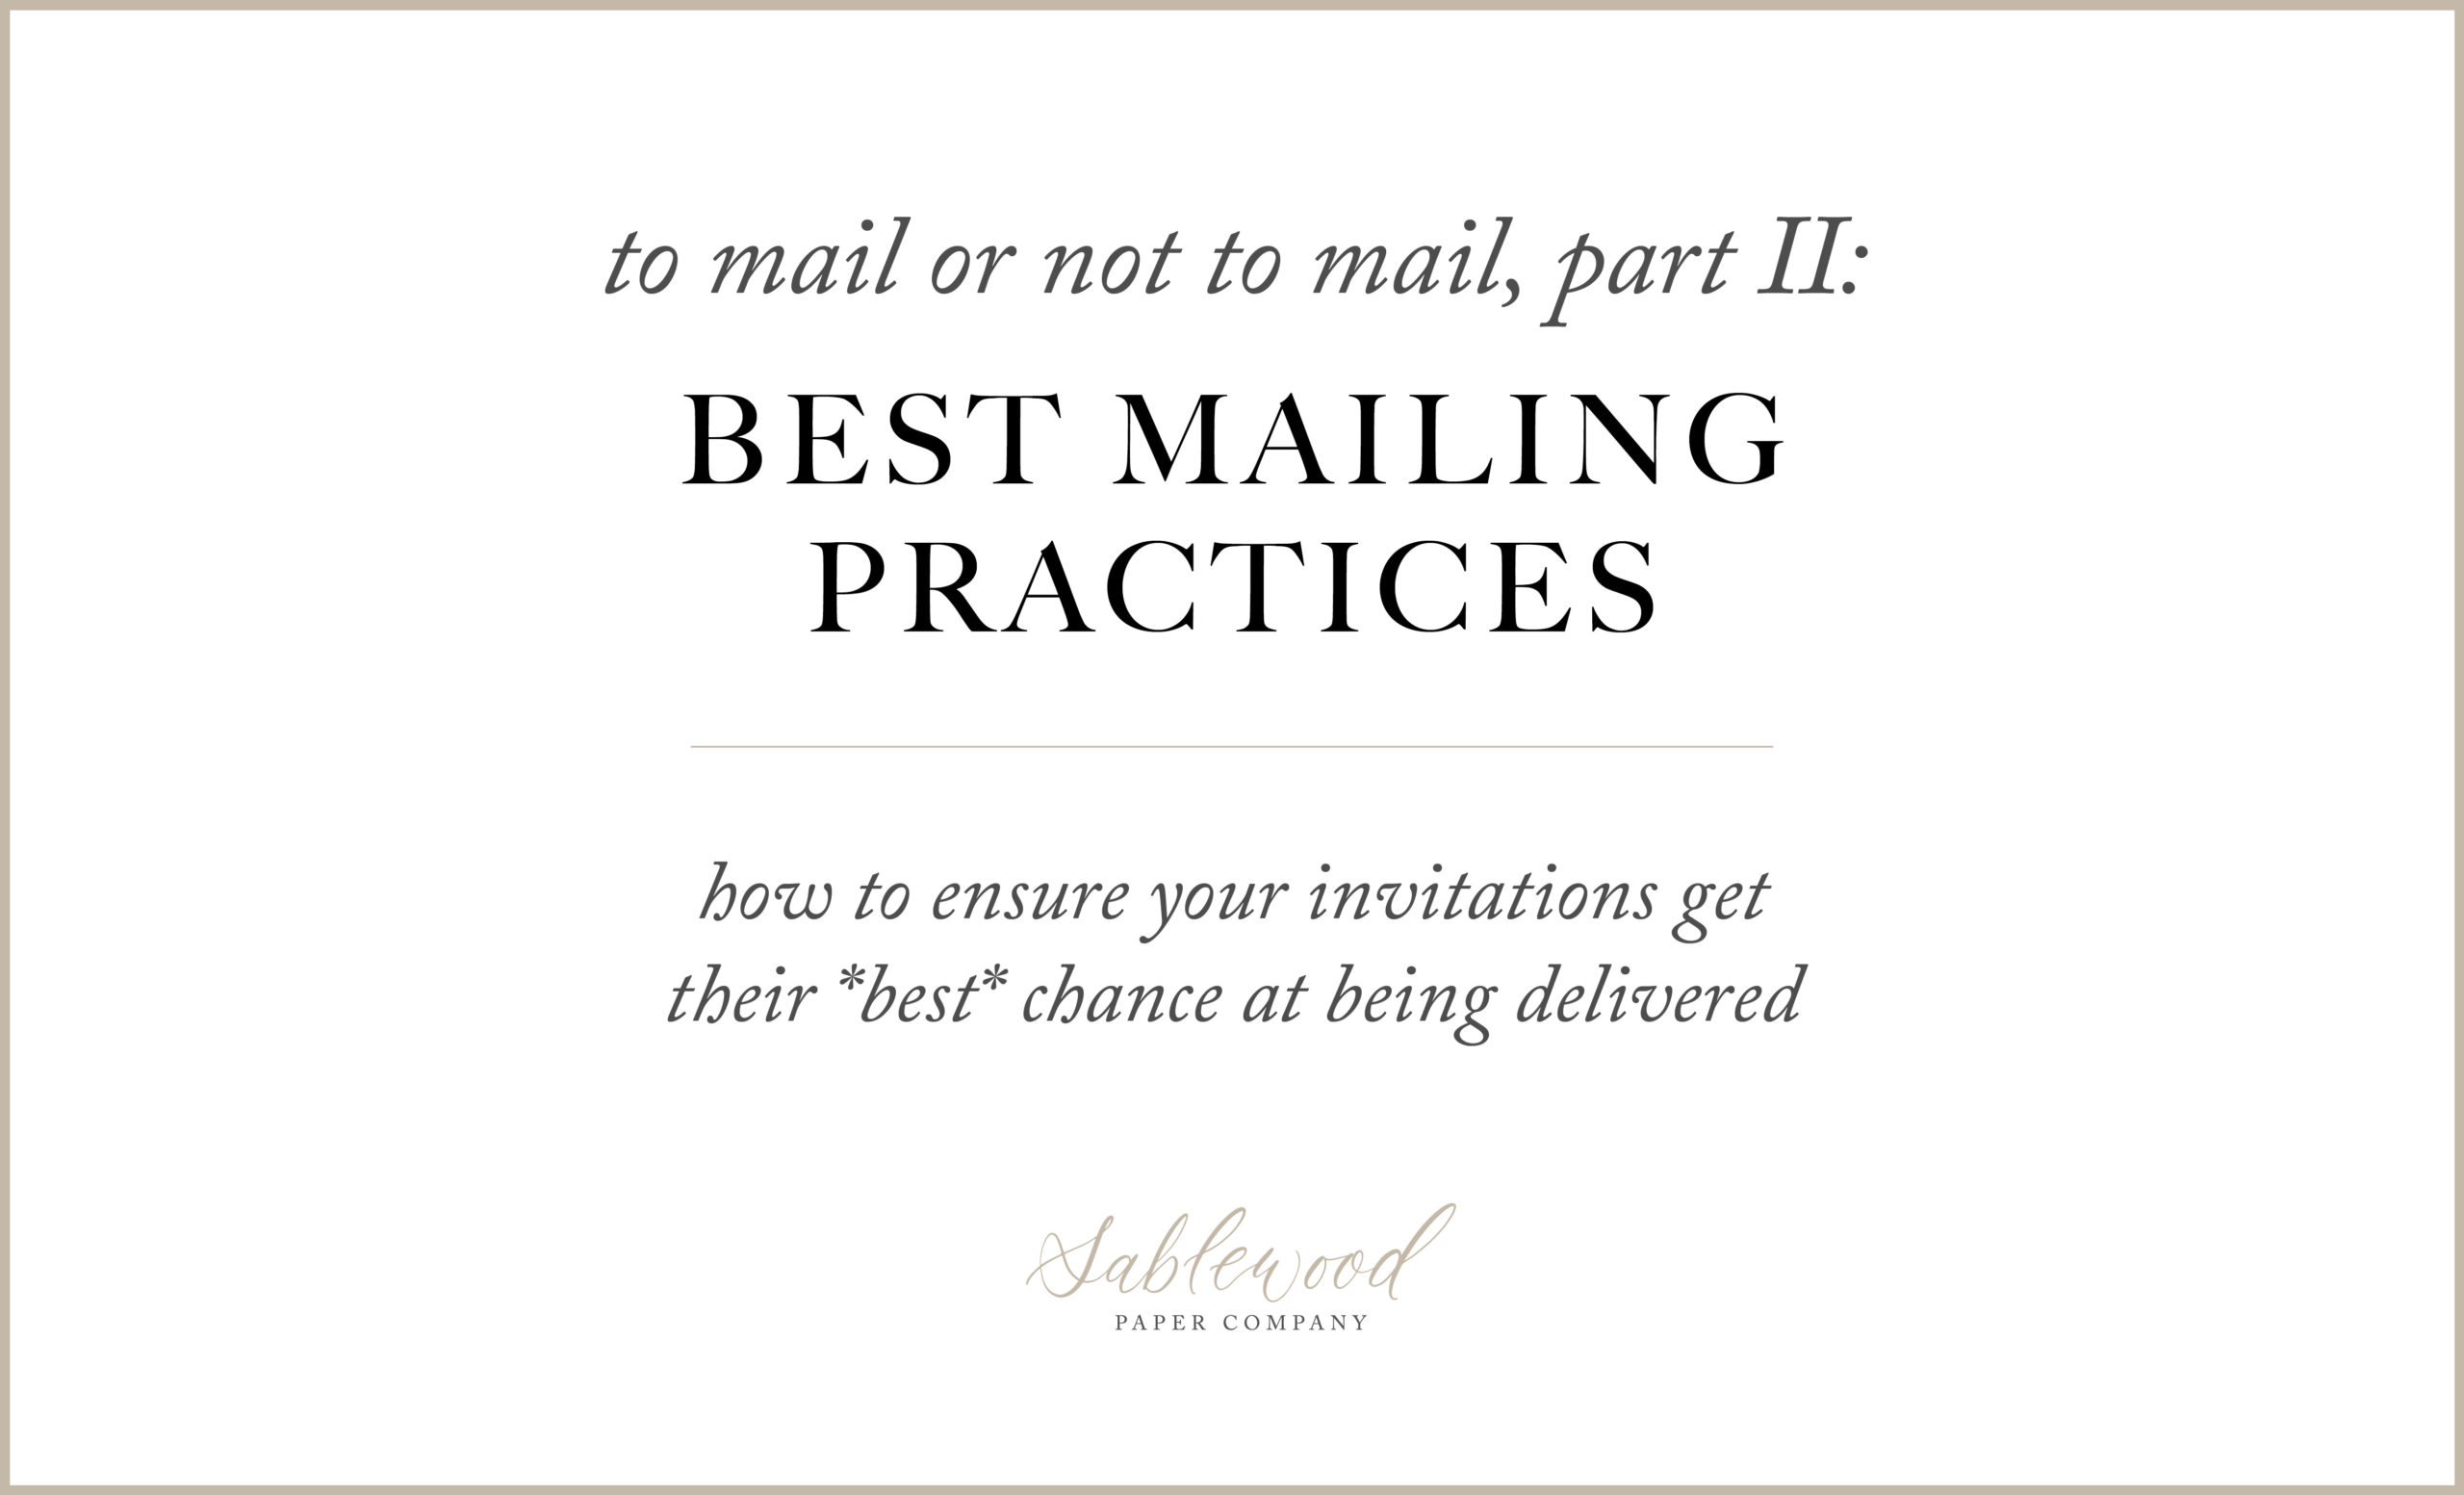 Blog Post: Best Mailing Practices for Invitations